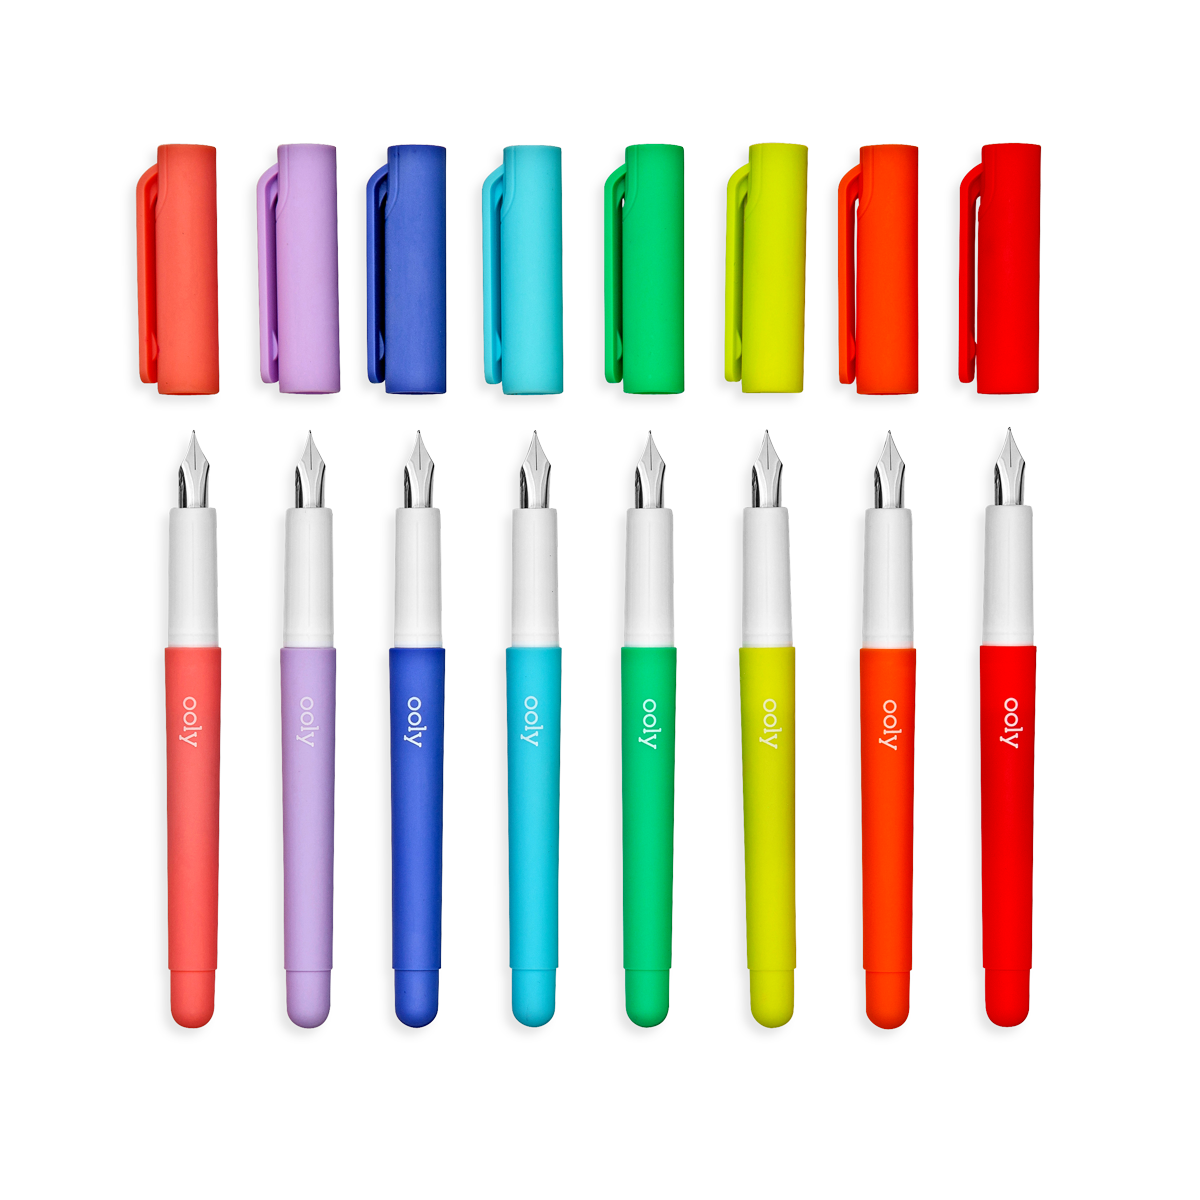 Yoobi Multicolor Pen Set - Clickable Ballpoint Pen with 8 Colors - Rainbow  Color Pens for Kids - Smooth Writing Colored Pens - Cute School Supplies 